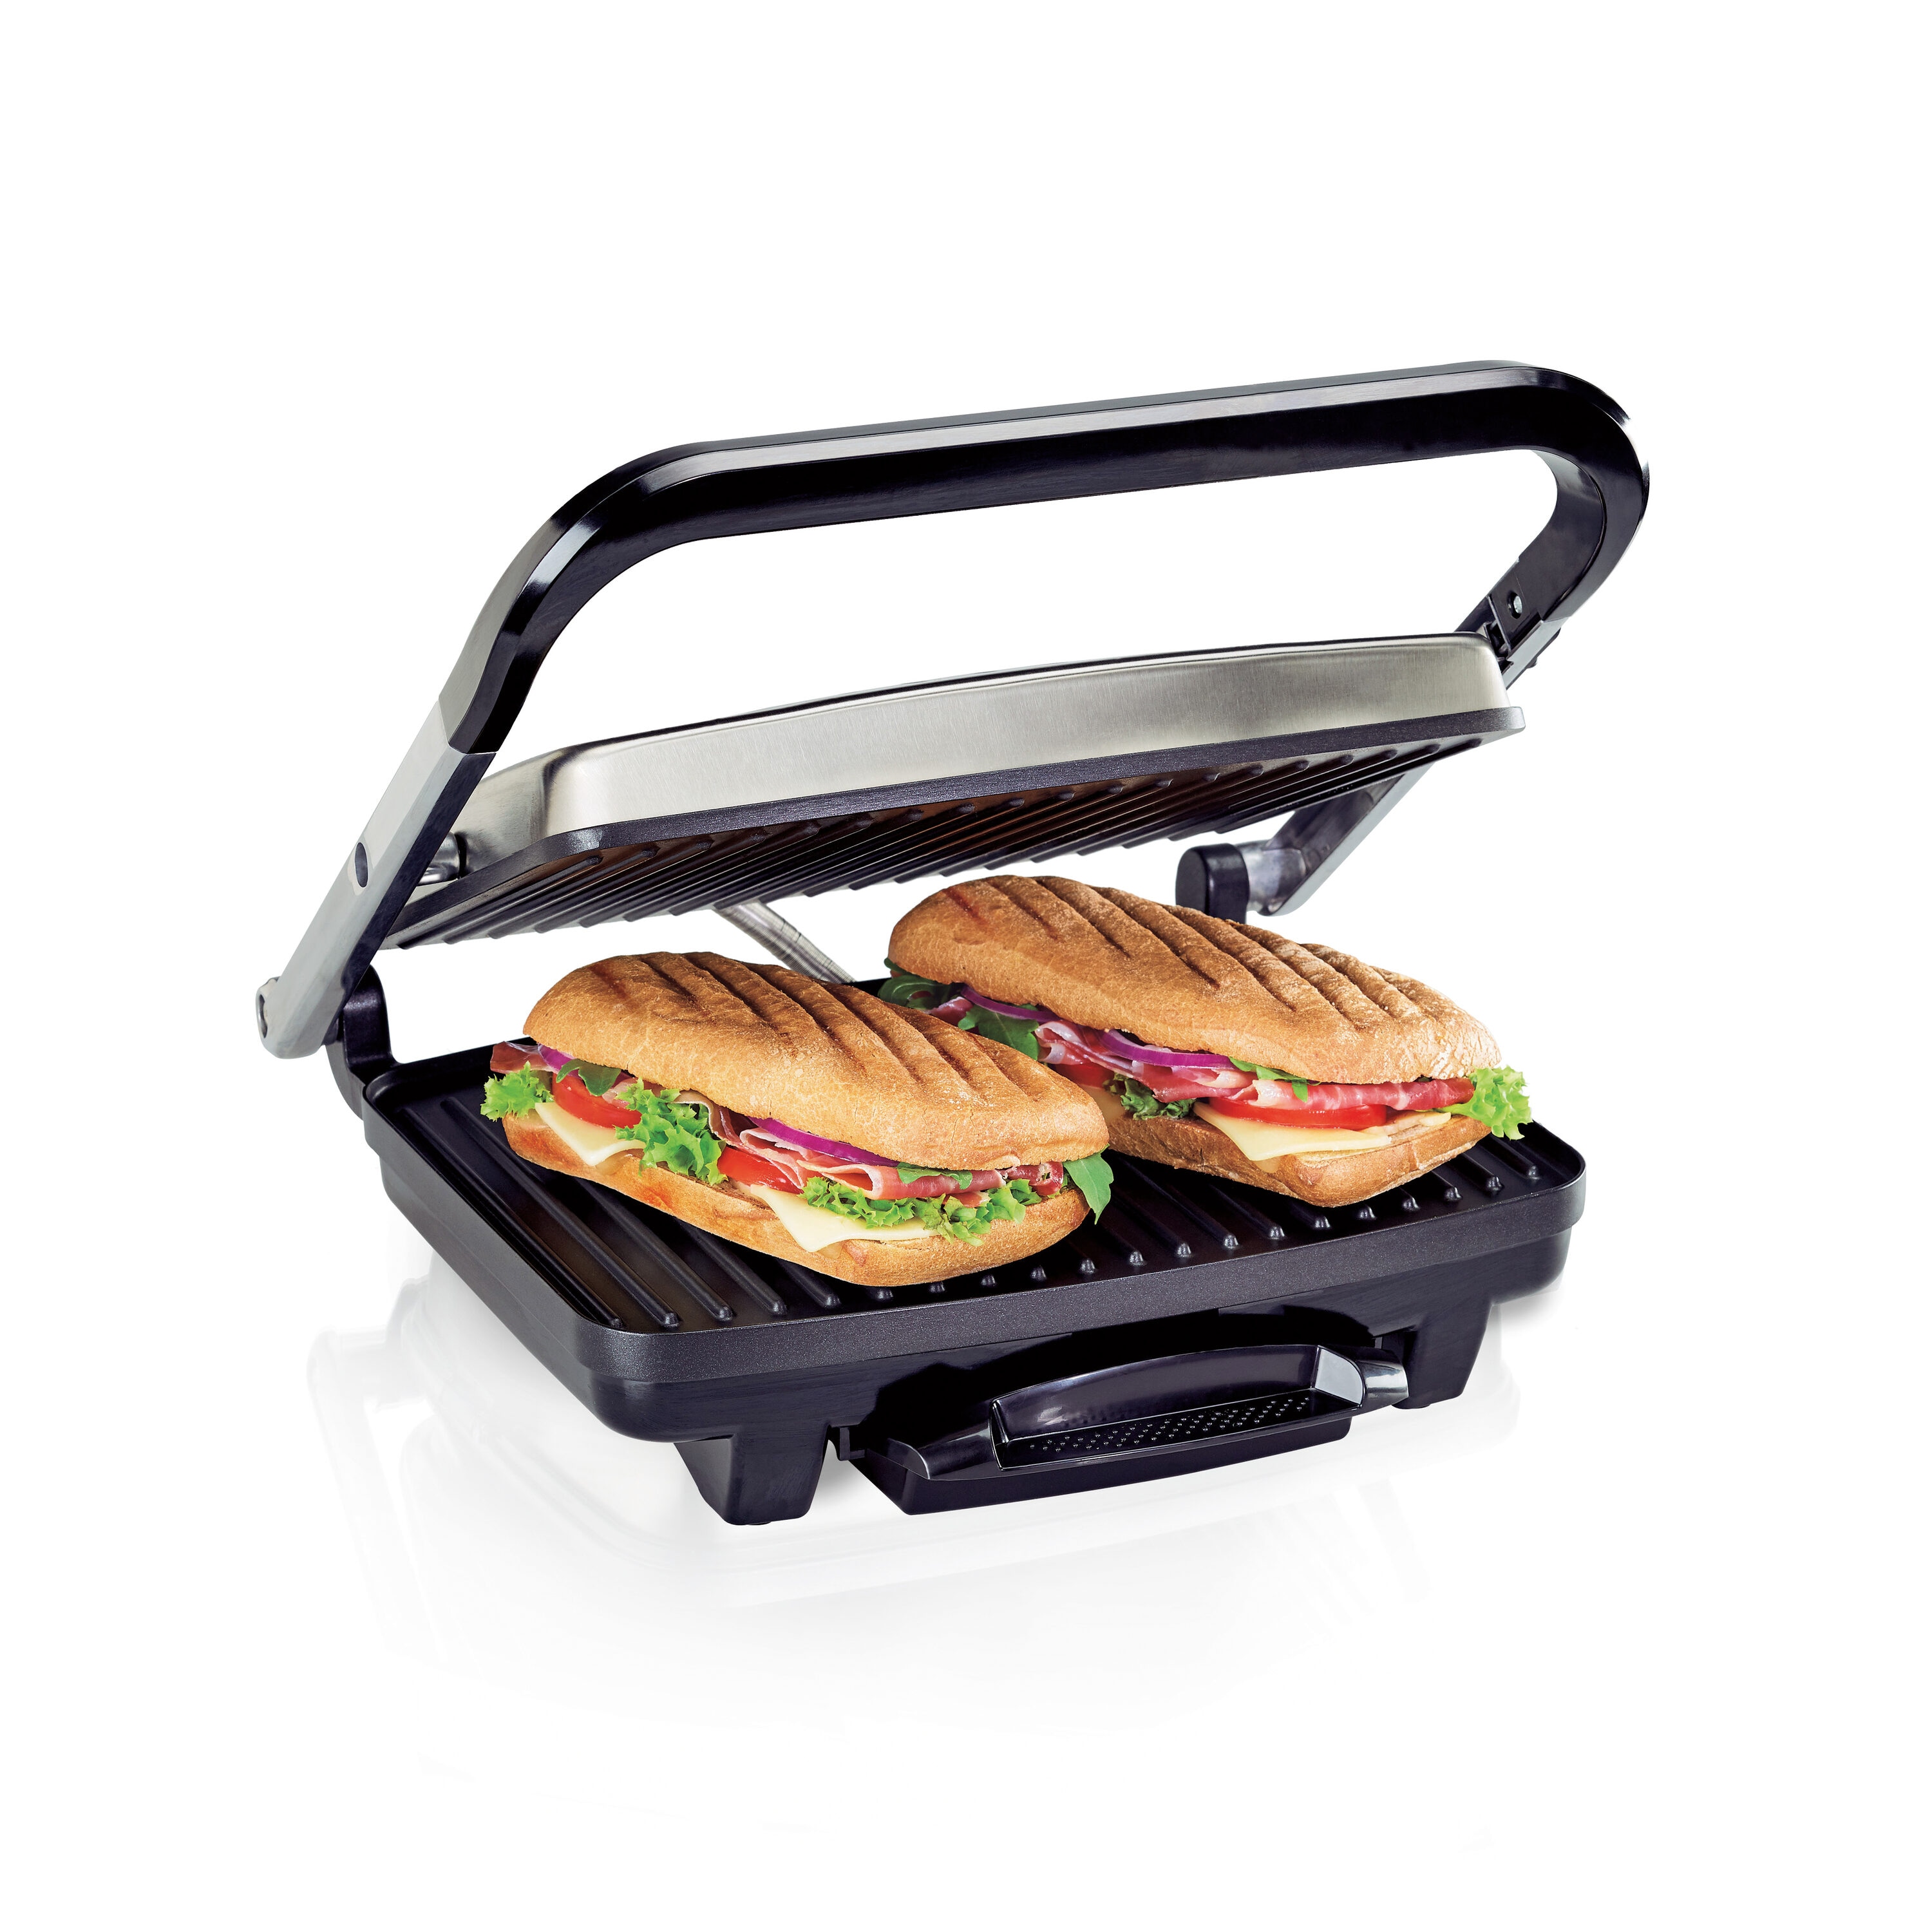 Hamilton Beach 11-in L x 12-in W Non-stick Residential in the Indoor Grills  department at